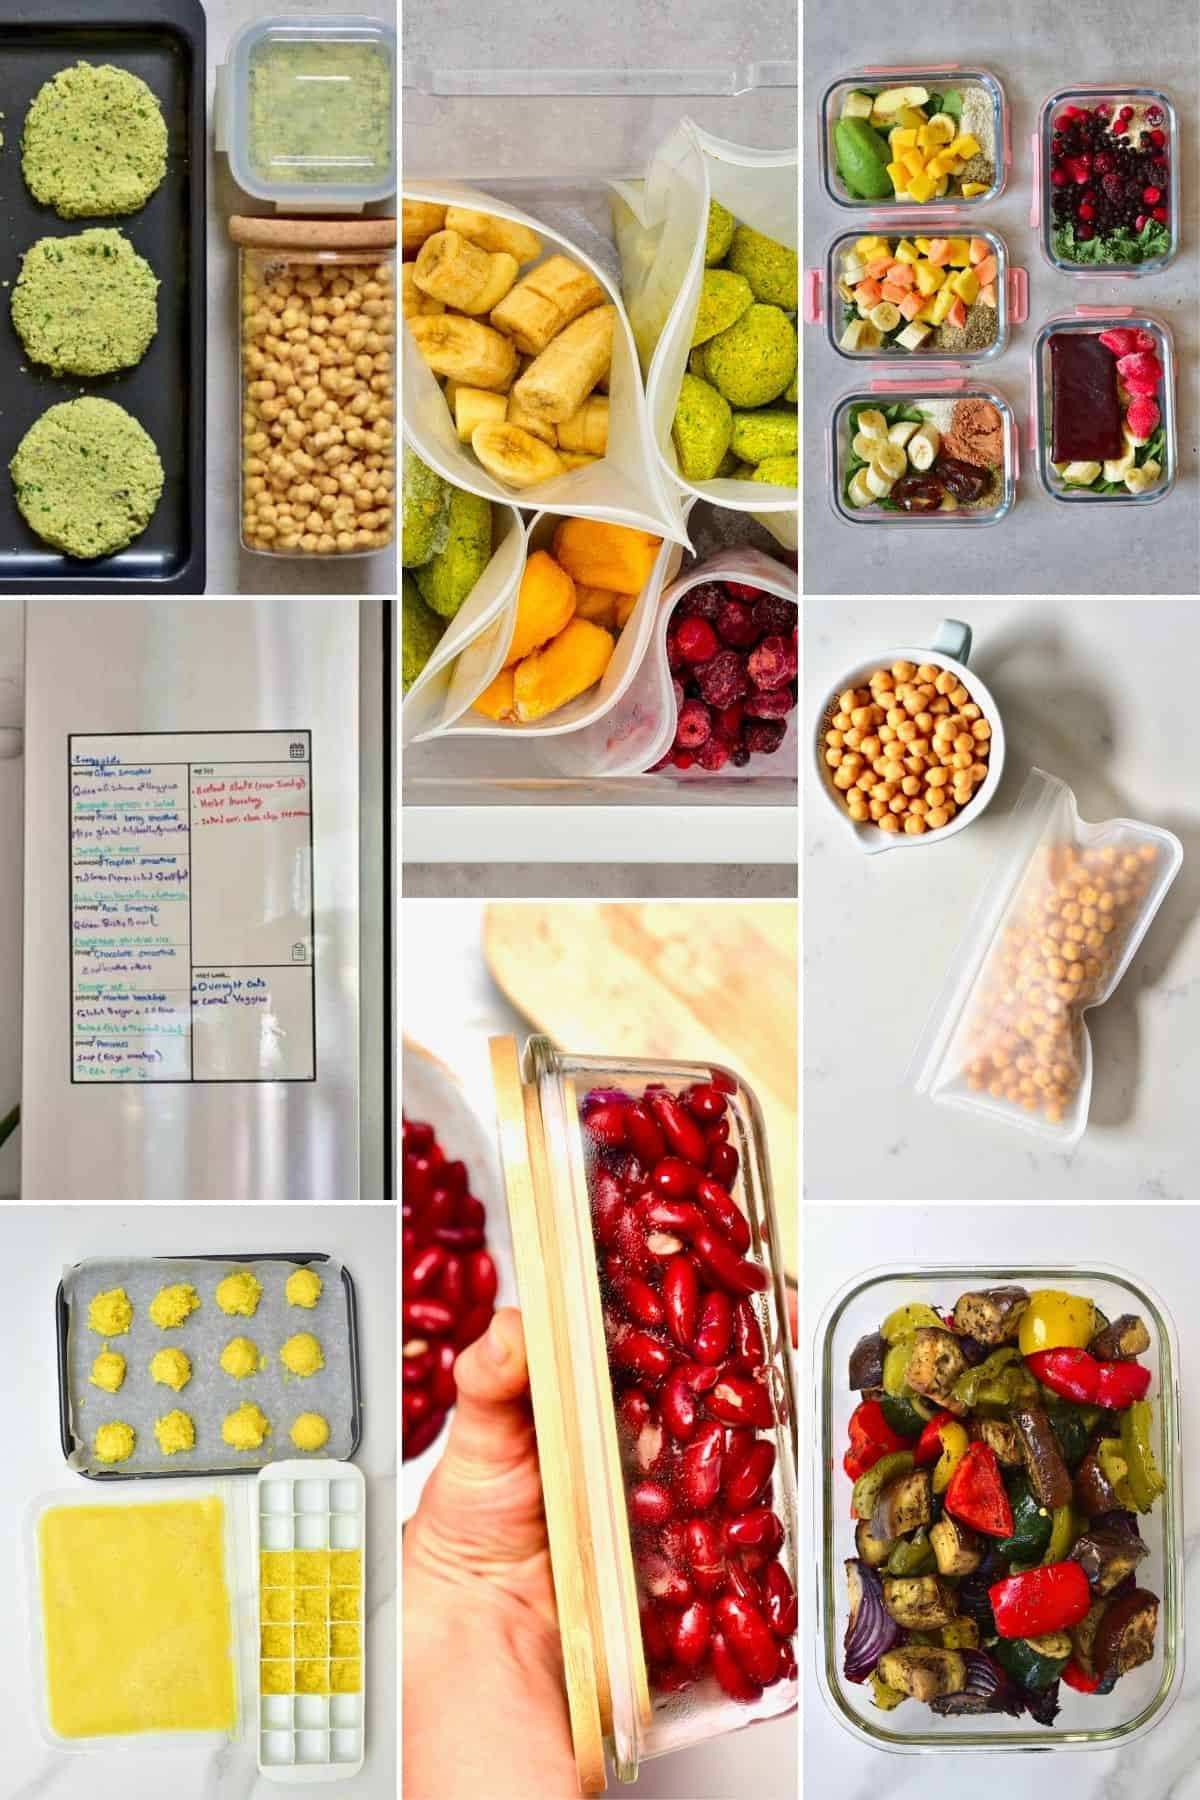 10 Essential Tips to Master Meal Prepping